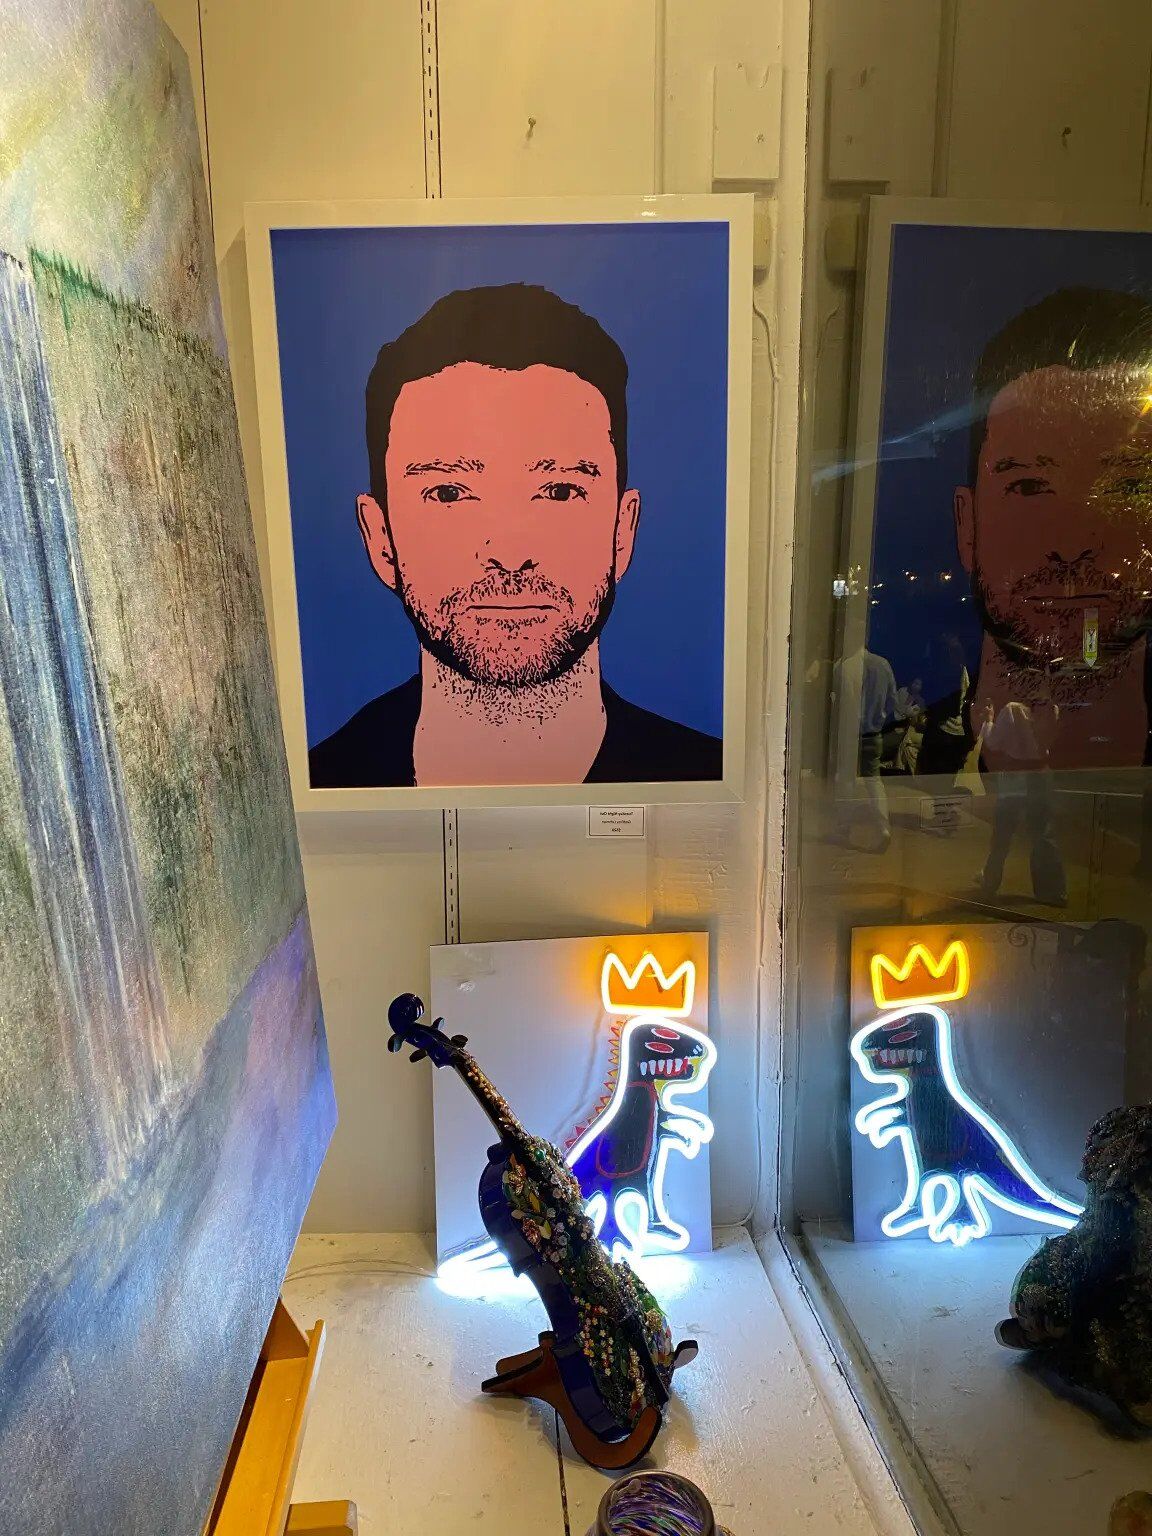 Justin Timberlake now has his own spot in a New York gallery after the drunk incident: Americans stand in line to see the masterpiece